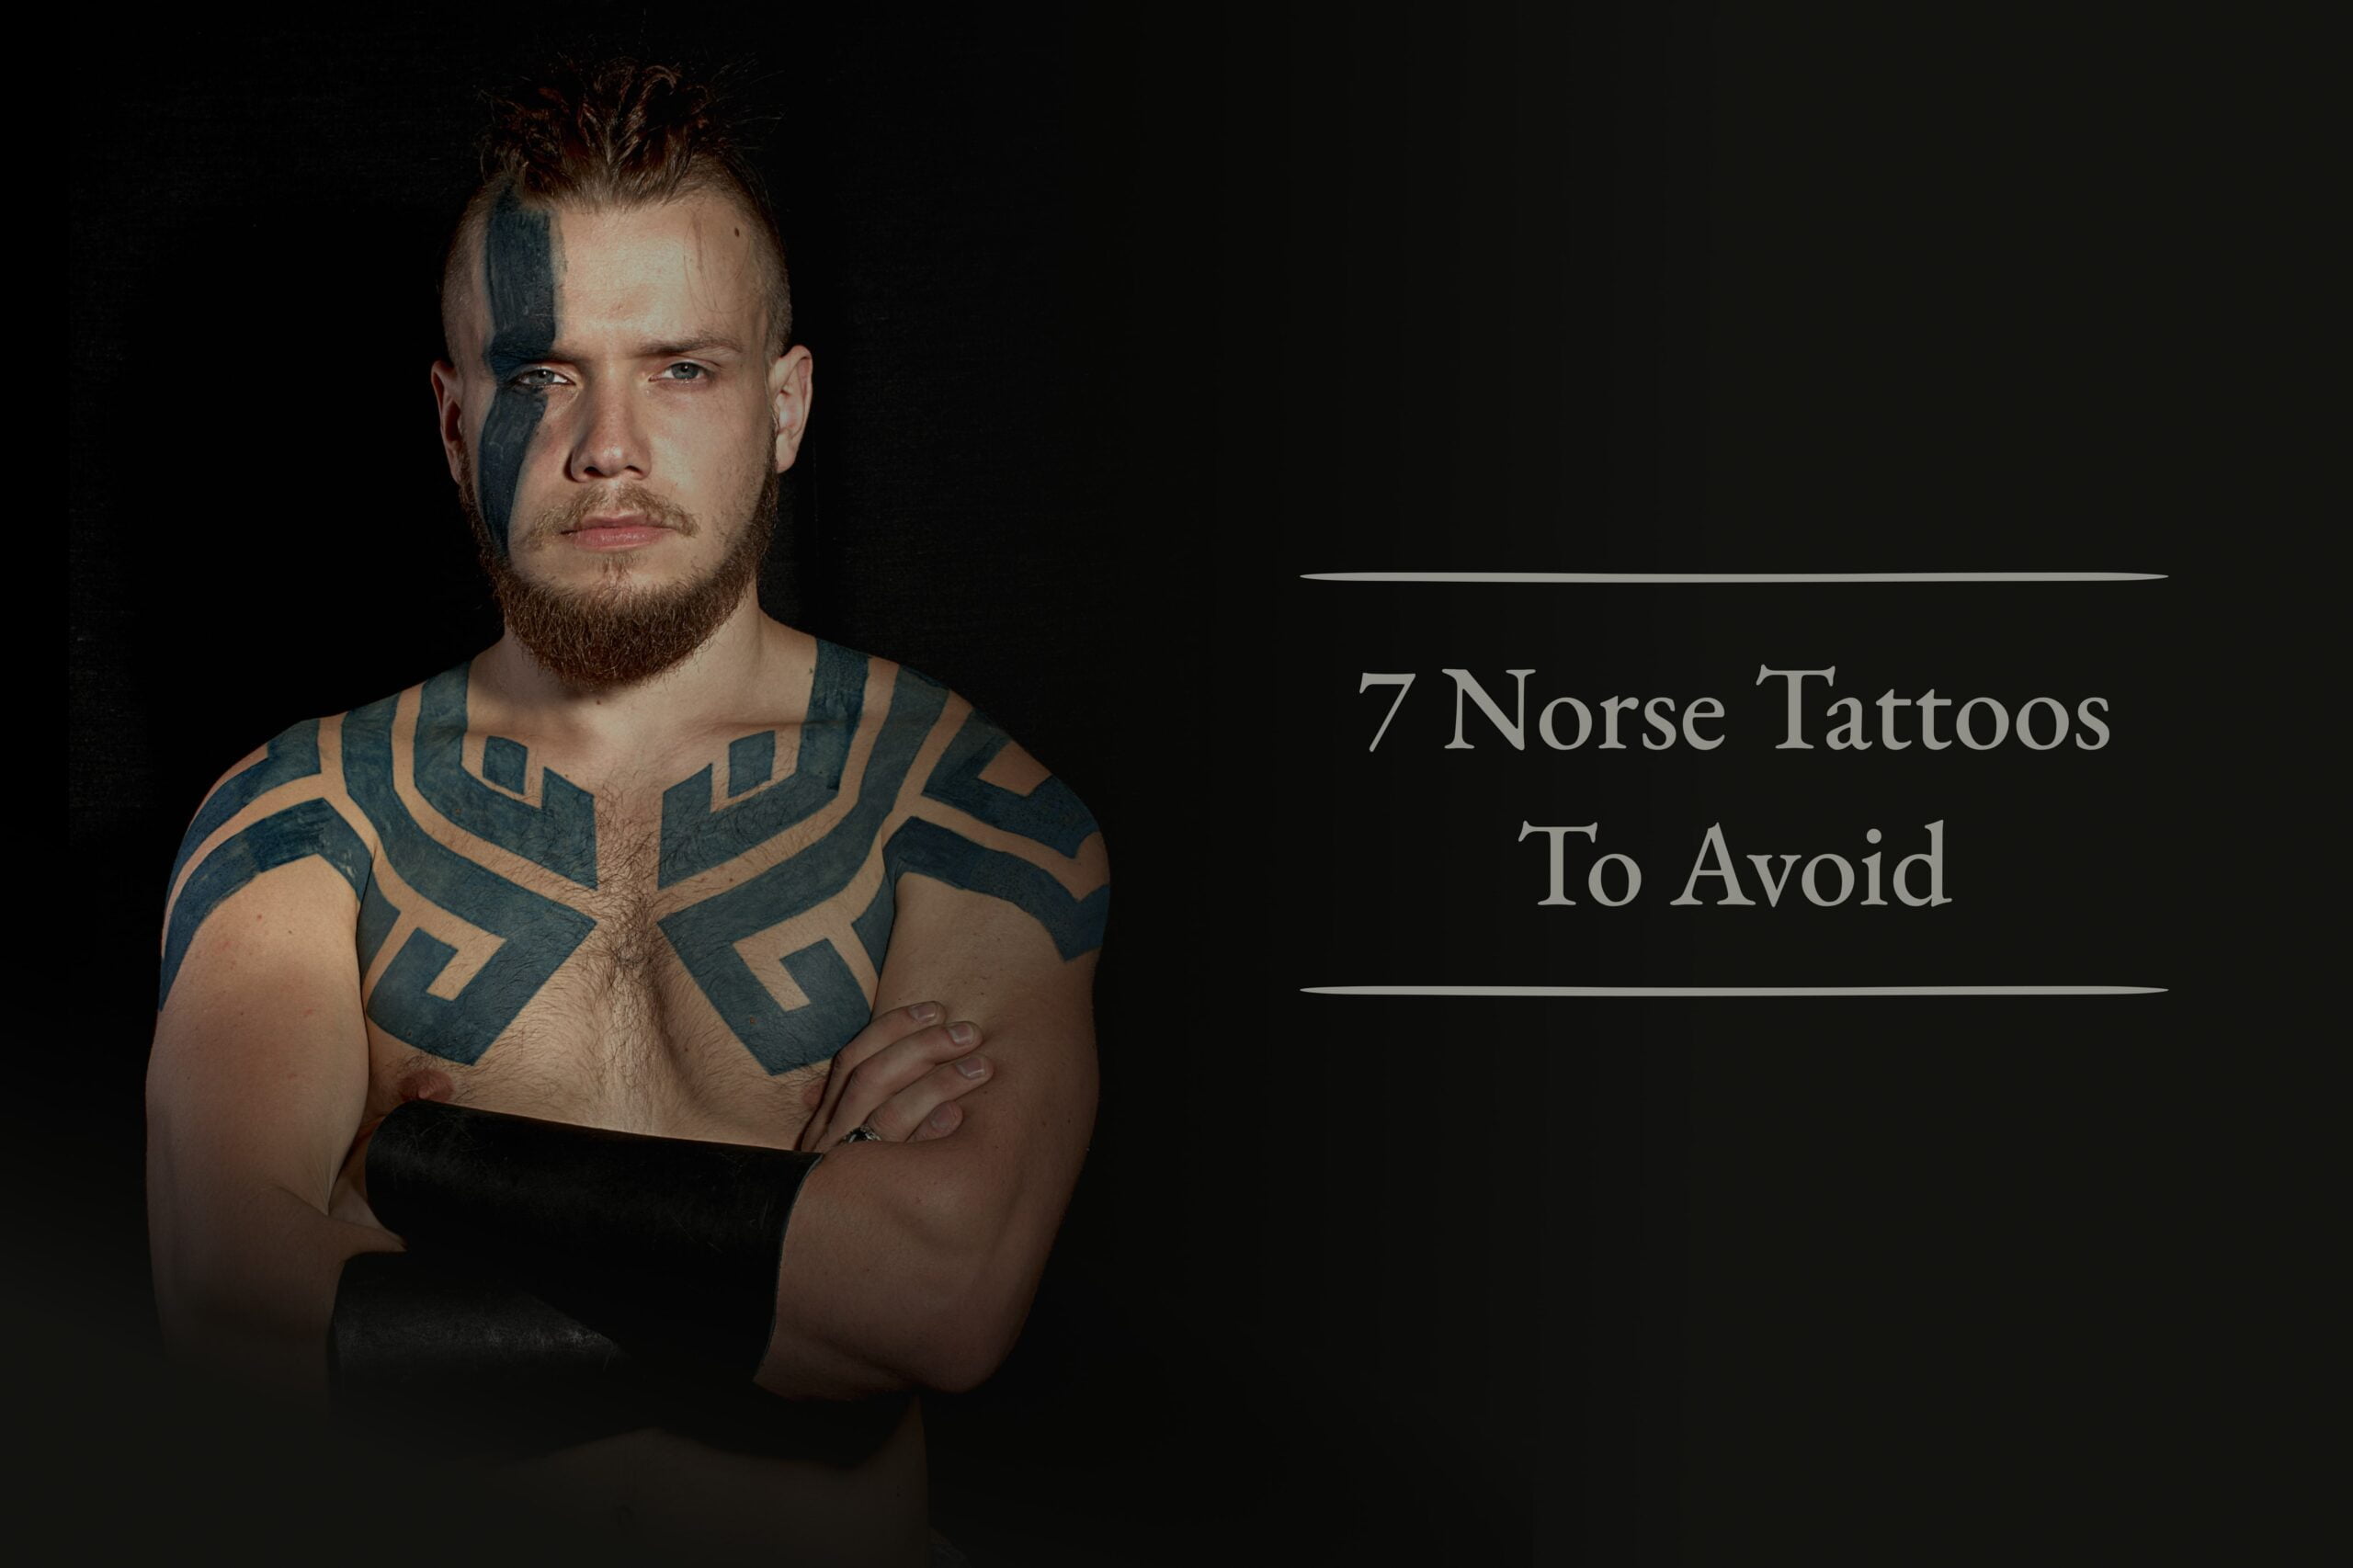 viking tattoos and meanings  viking symbols and their meanings  Viking  symbols Norse symbols Symbols and meanings